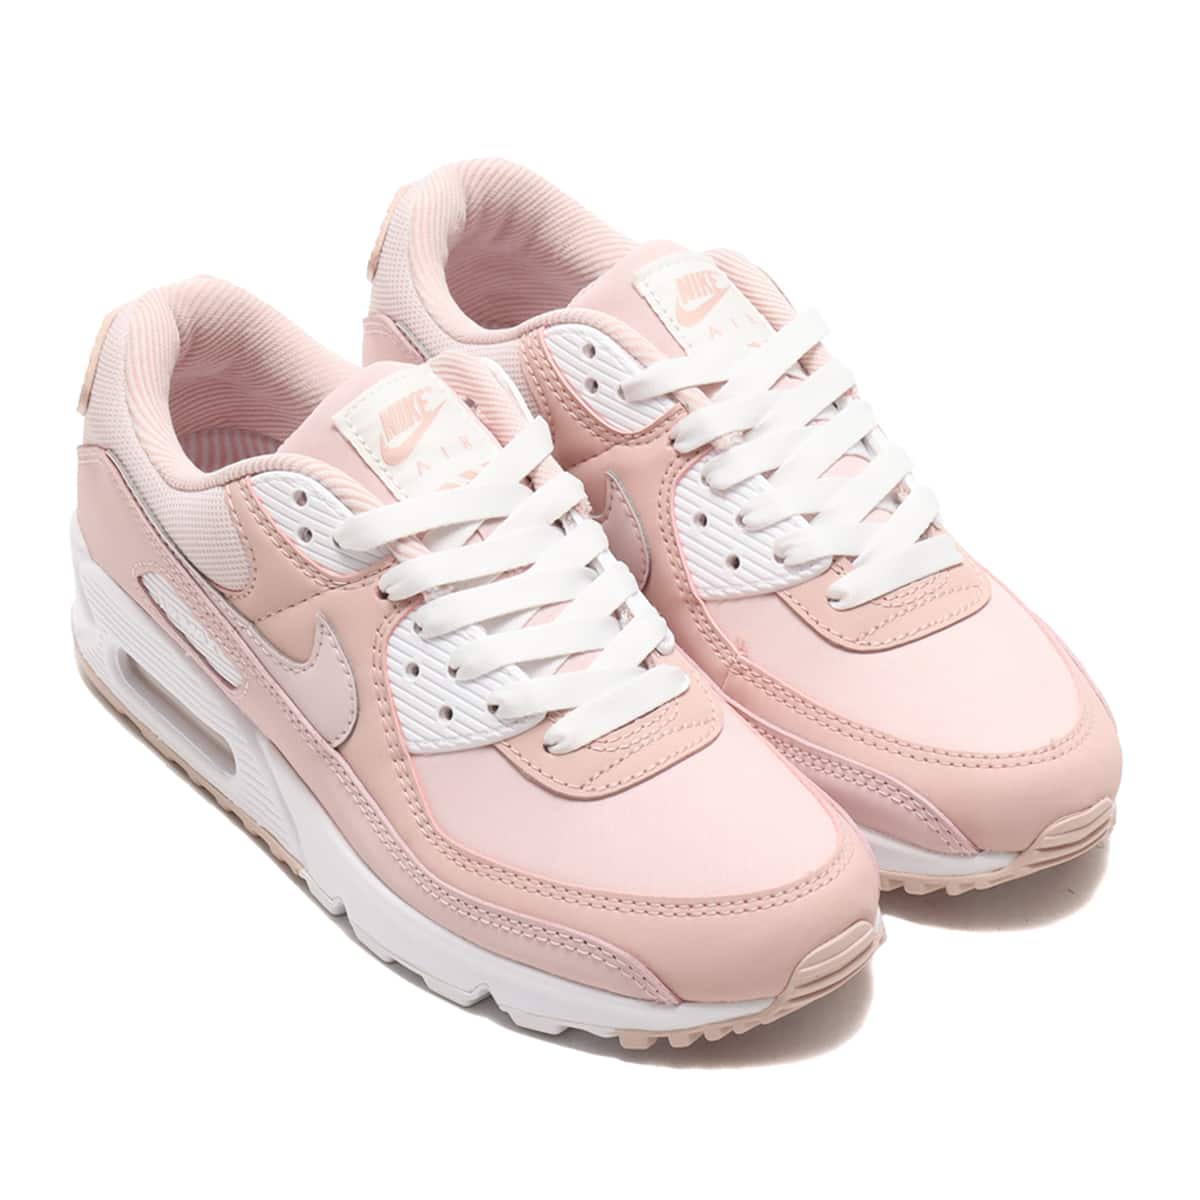 NIKE W AIR MAX 90 BARELY ROSE/BARELY ROSE-PINK OXFORD 21SU-I_photo_large